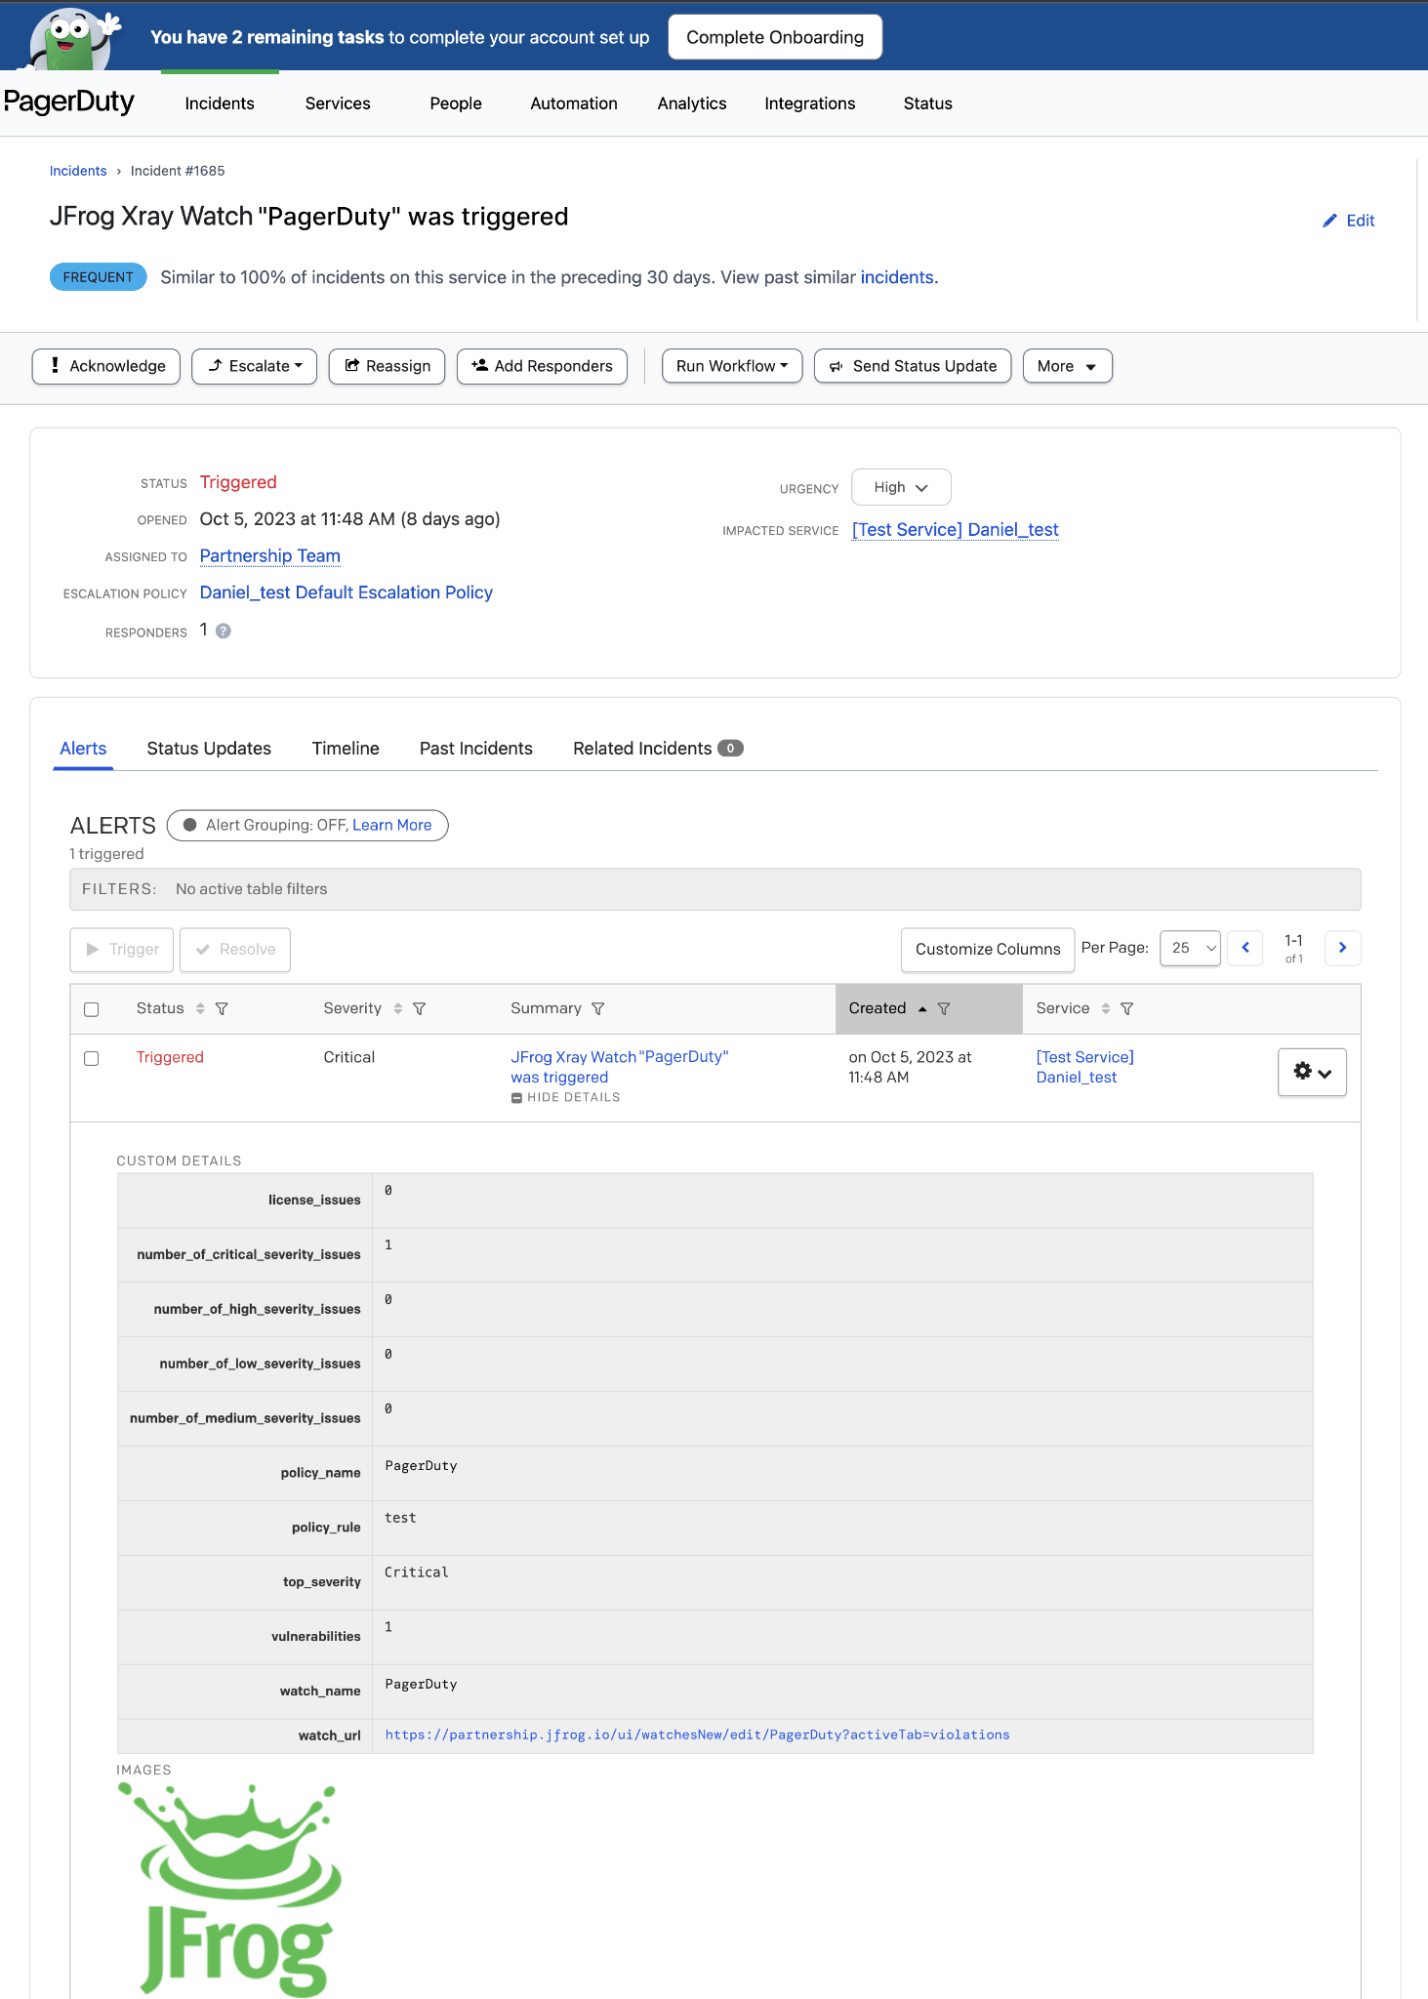 Detailed view of the PagerDuty incident notification with a JFrog Xray Watch Violation summary and deep link to JFrog for complete details